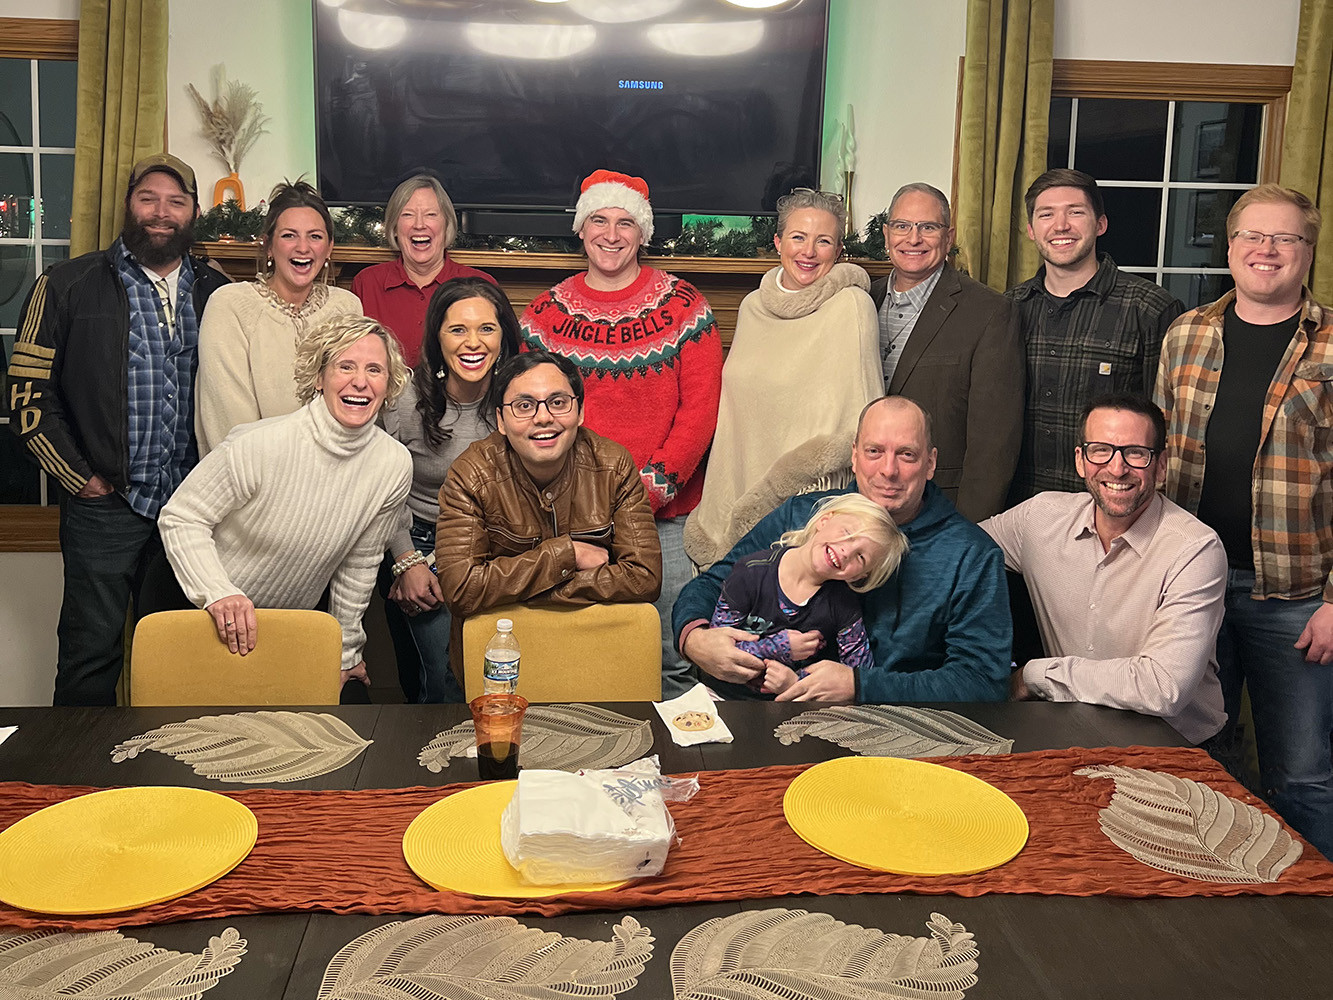 Growers Edge team members at our annual holiday celebration and meal hosted at one of our team member’s homes!